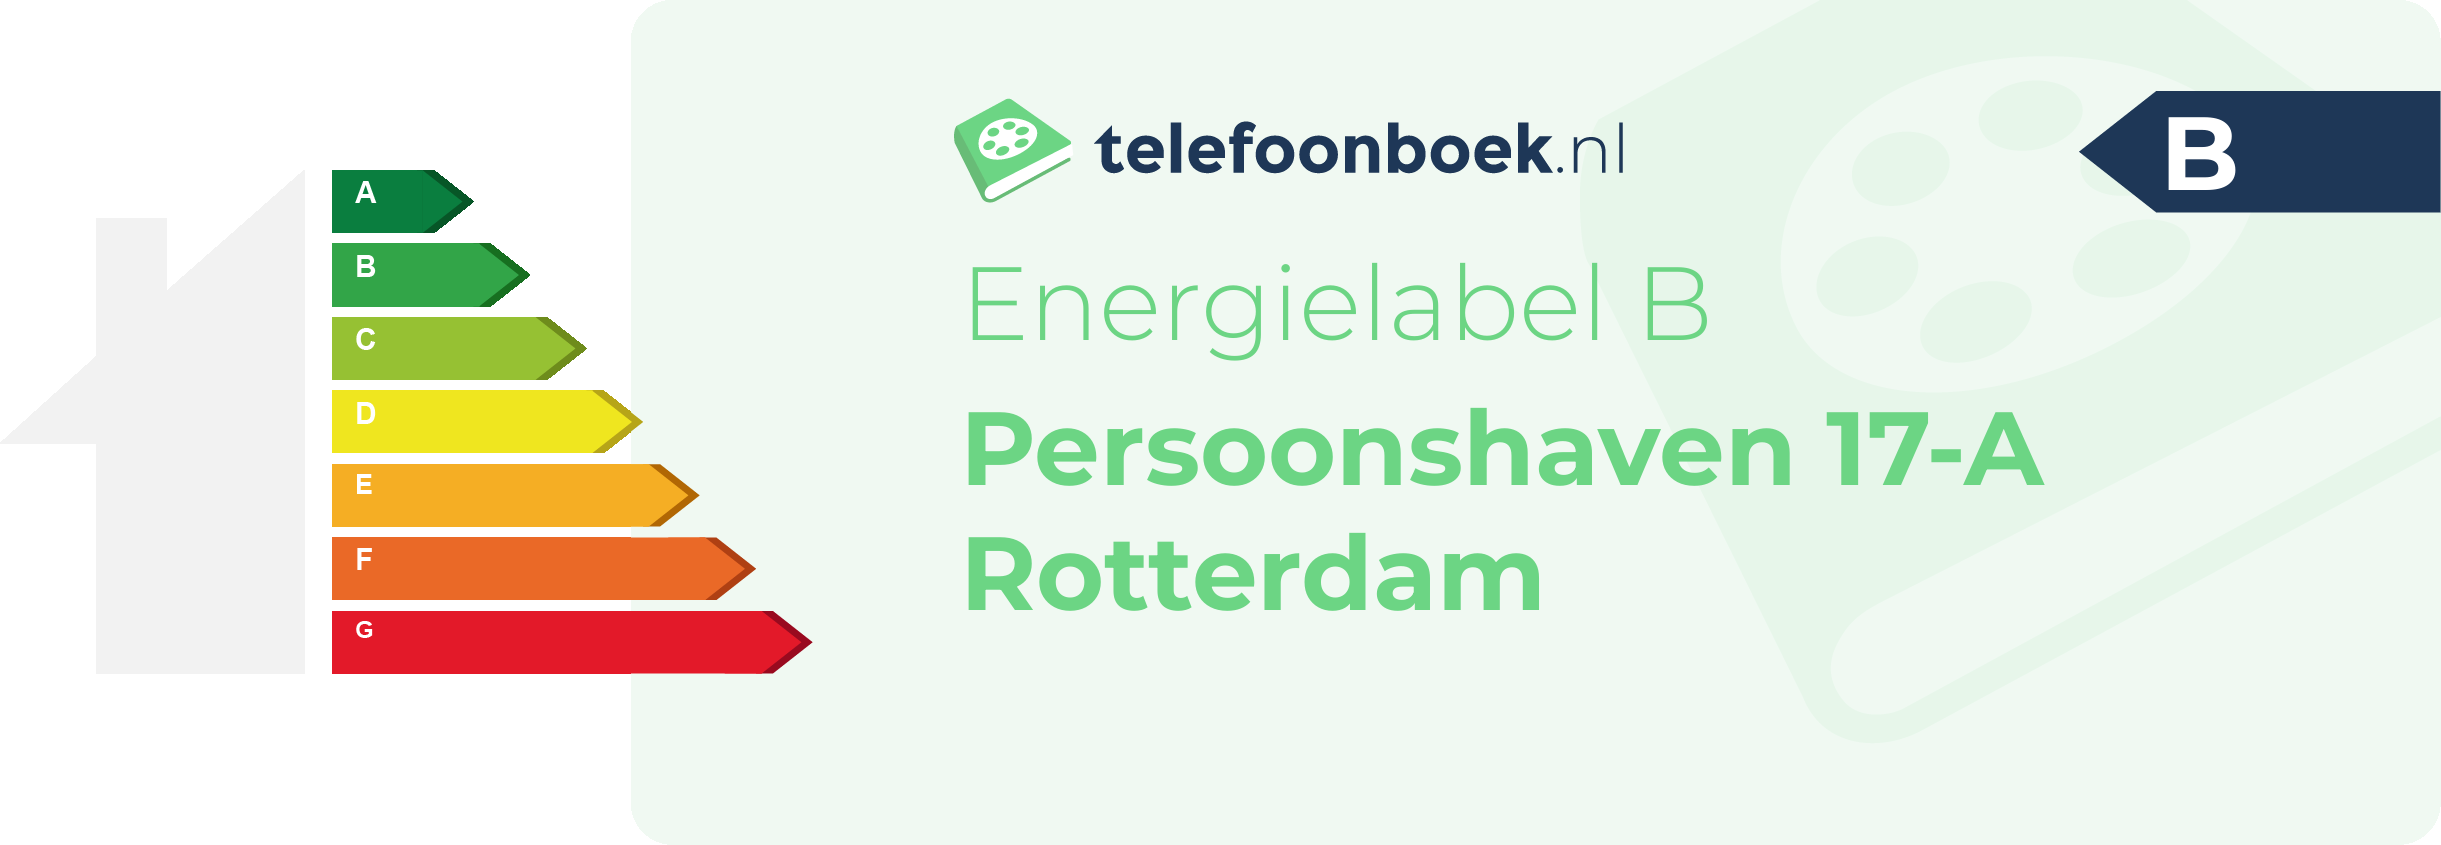 Energielabel Persoonshaven 17-A Rotterdam